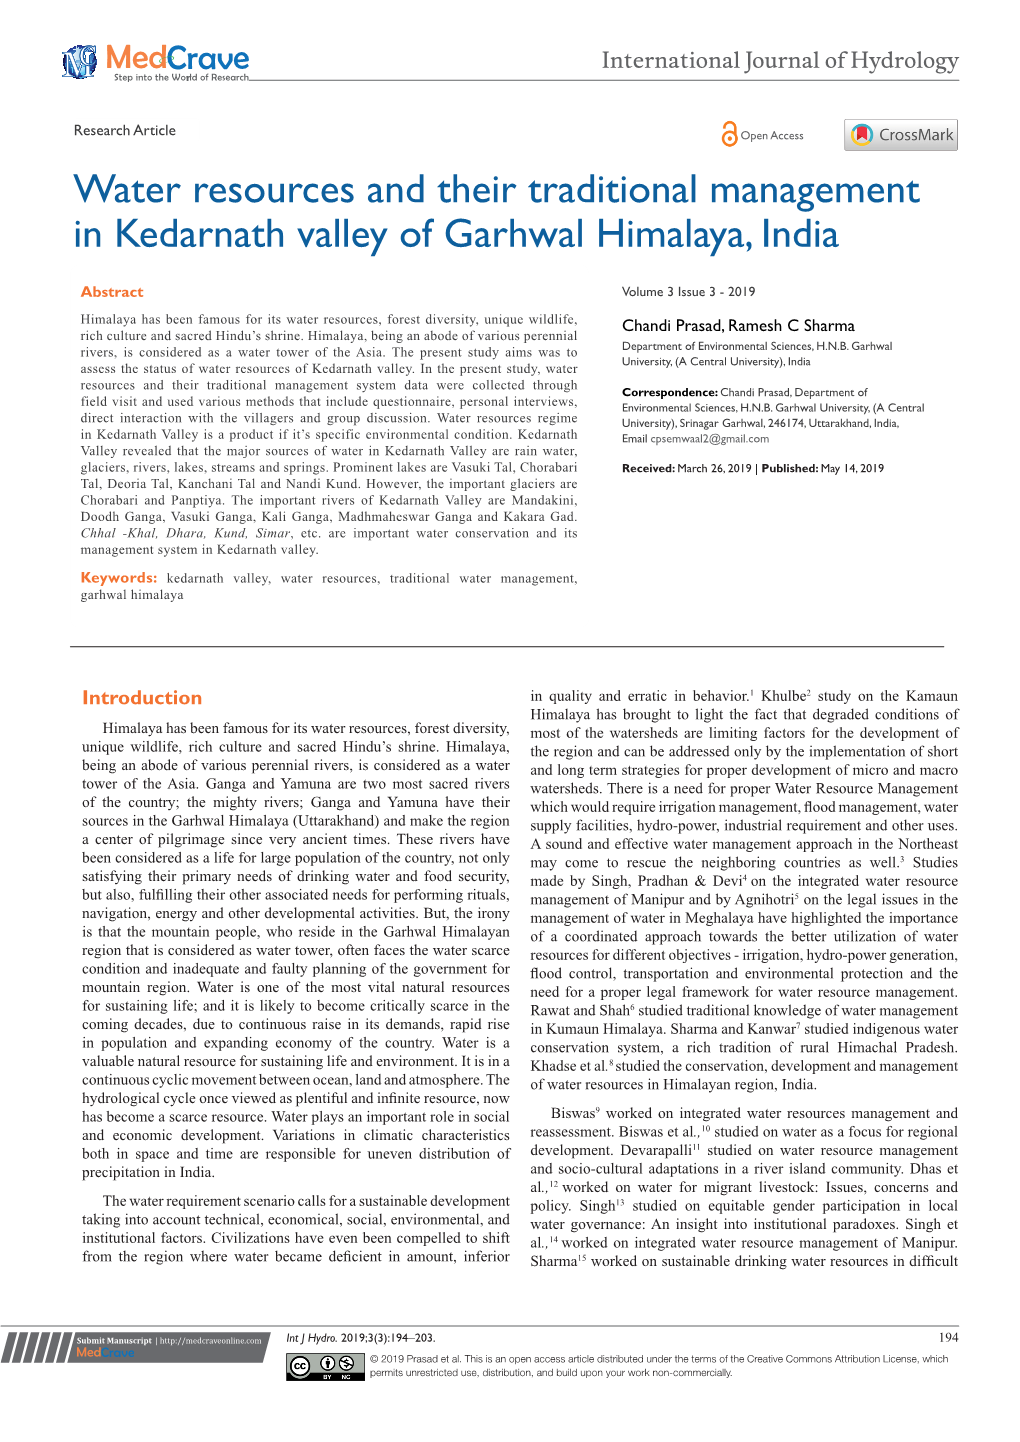 Water Resources and Their Traditional Management in Kedarnath Valley of Garhwal Himalaya, India